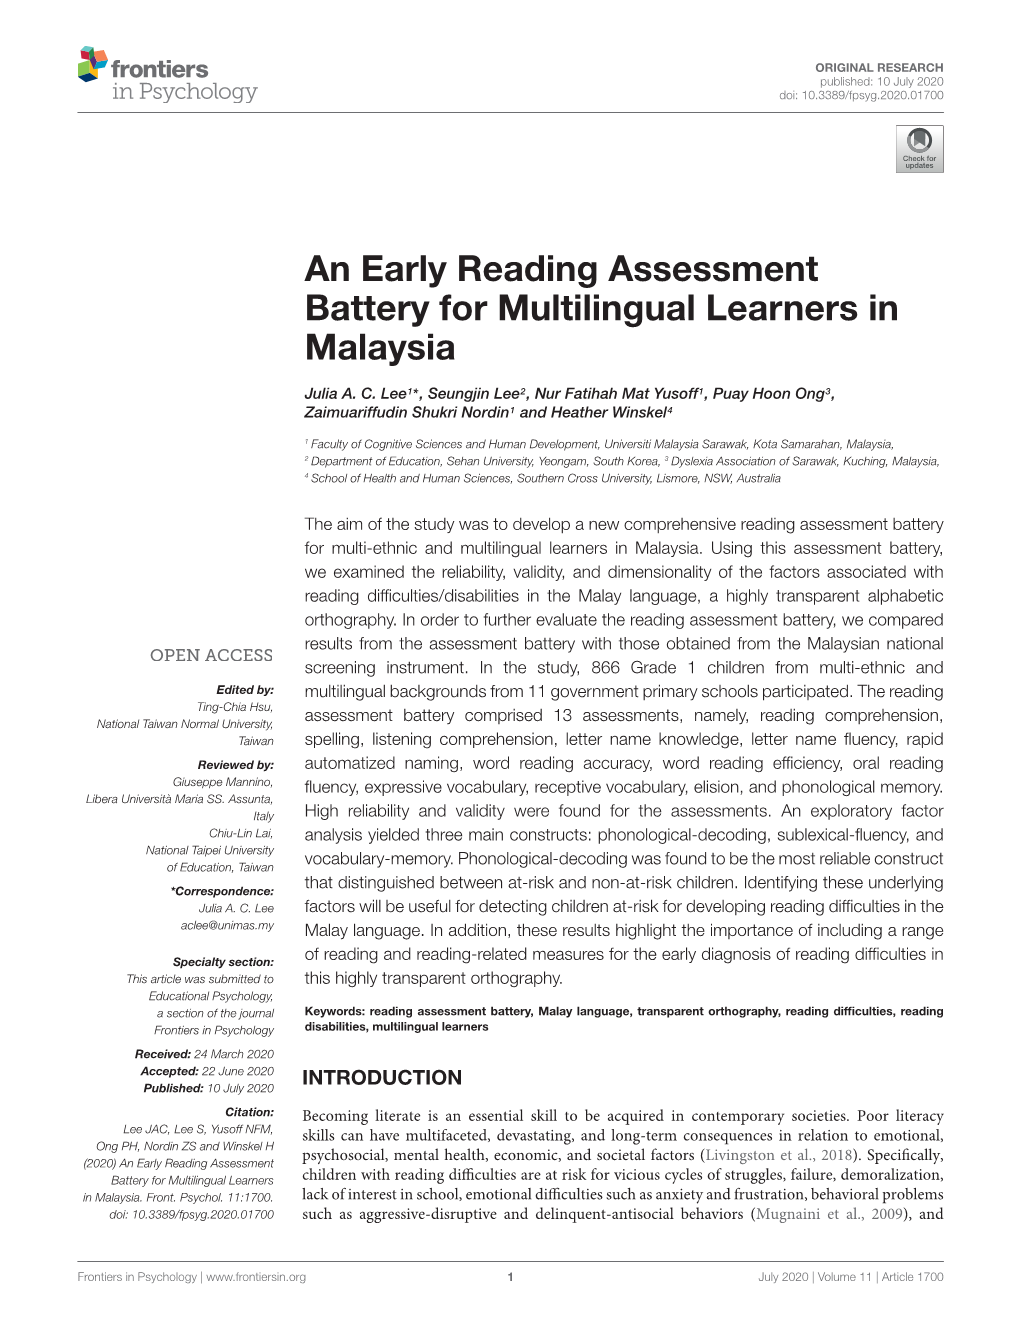 An Early Reading Assessment Battery for Multilingual Learners in Malaysia